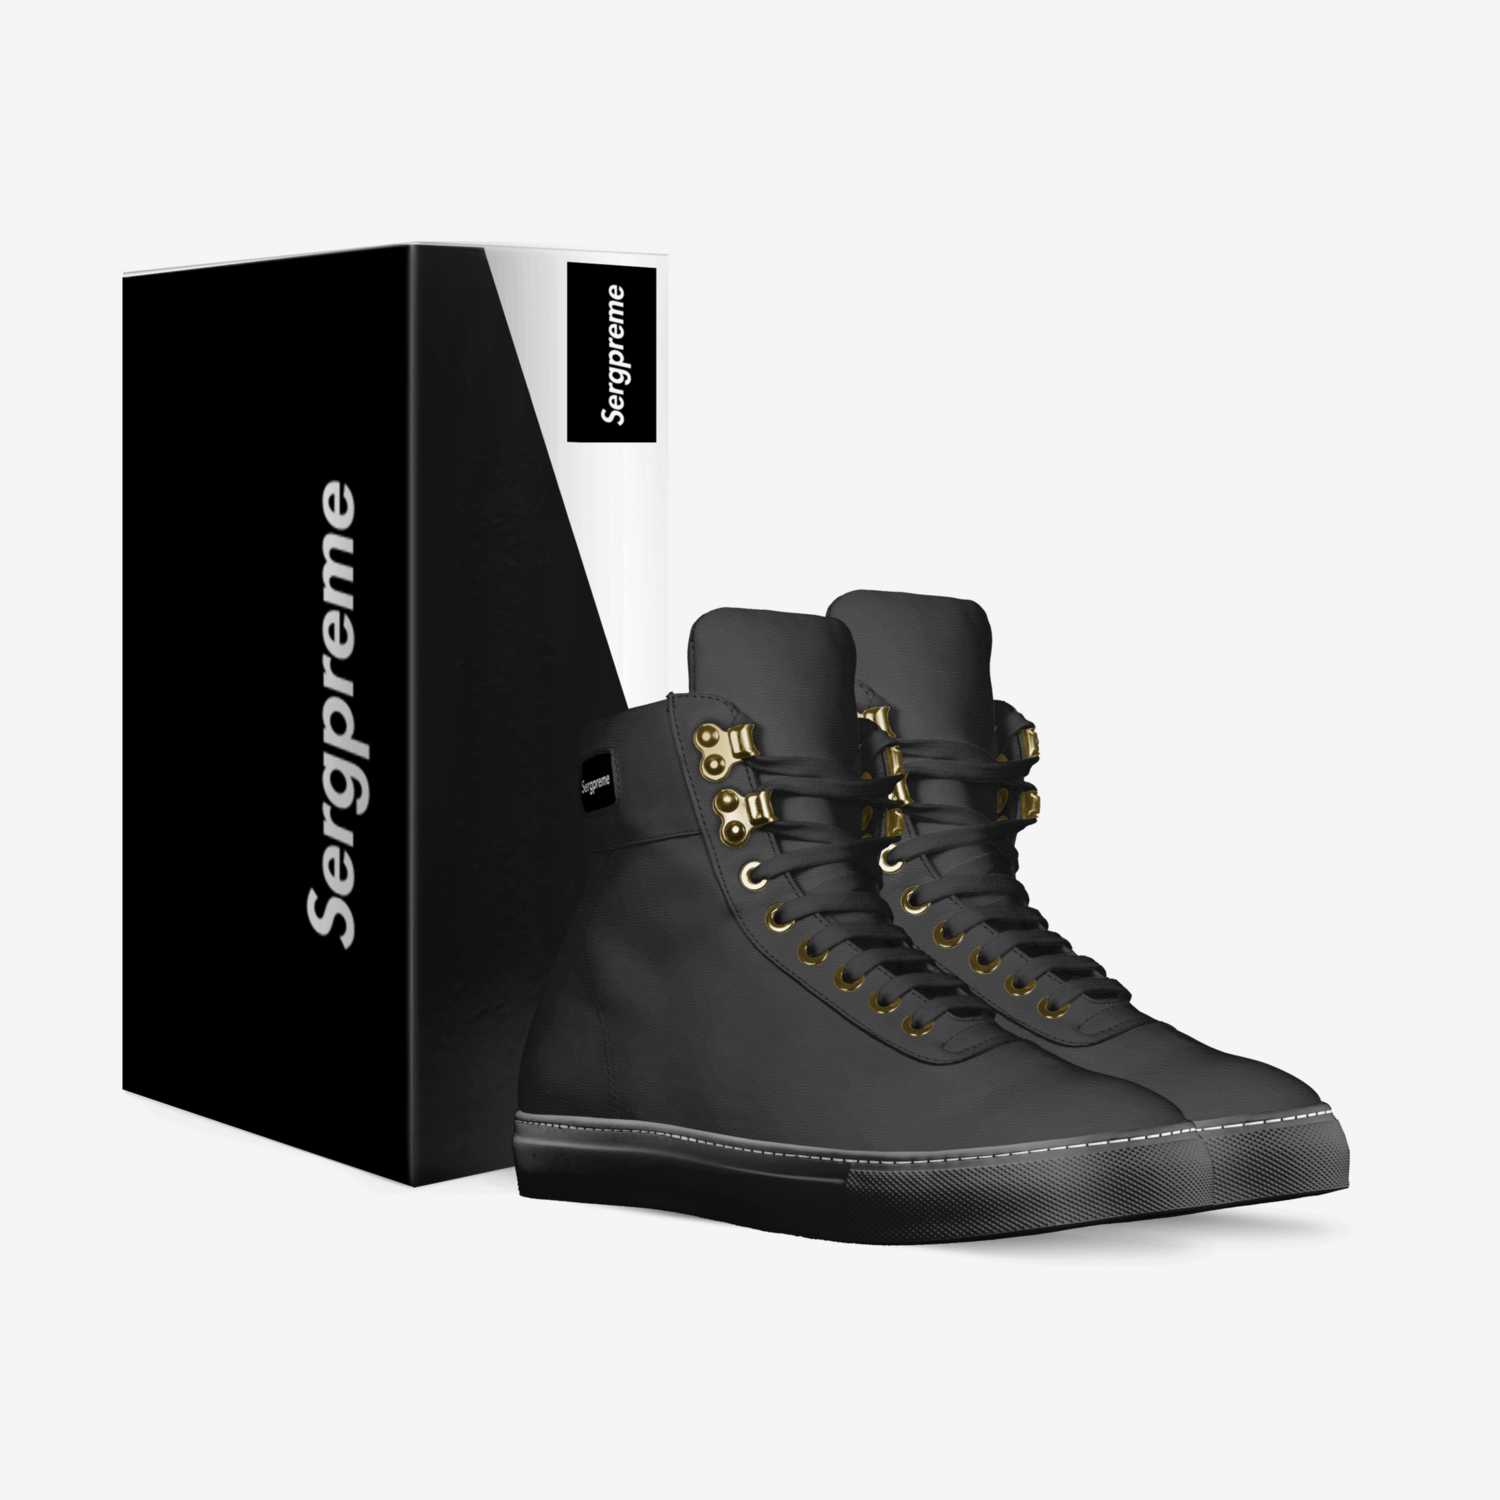 Ferro by Sergio custom made in Italy shoes by Sergio The God | Box view